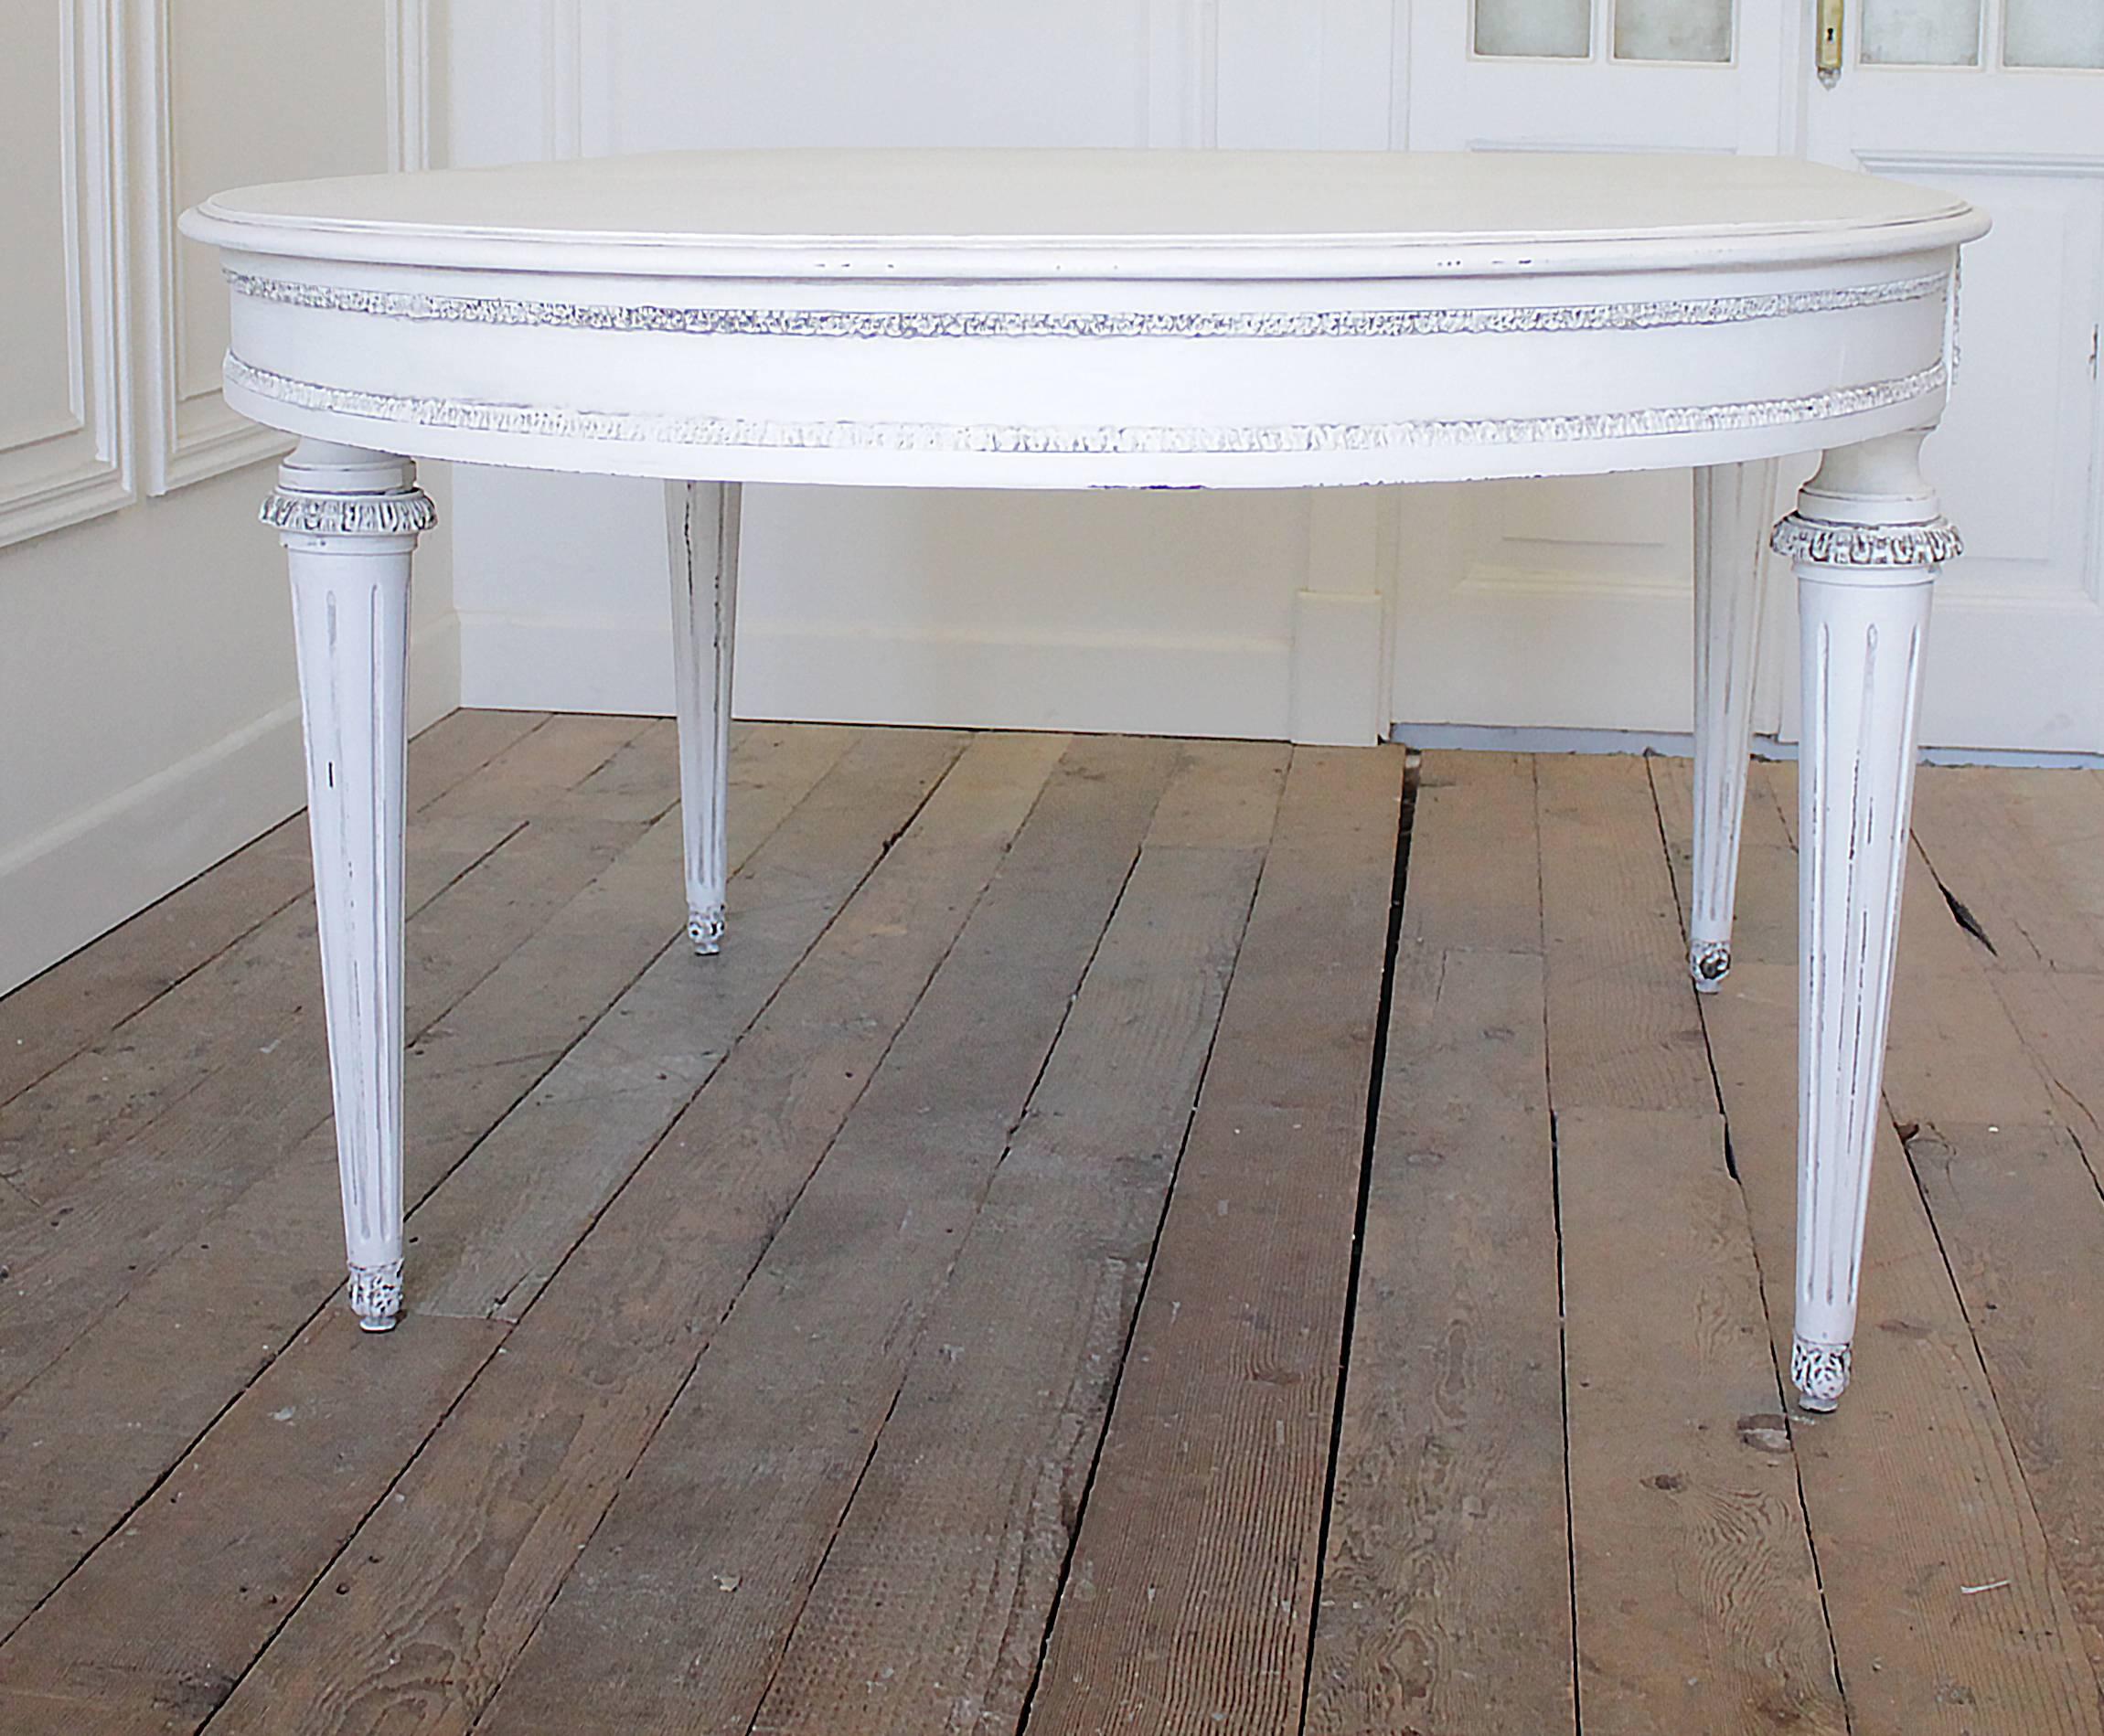 Large mahogany painted table in a soft oyster white, with subtle distressing and finished with an antique glaze. Classic fluted legs, with bronze-mounted decorations and trim. Legs are sturdy ready for everyday use. 
Measures: 89